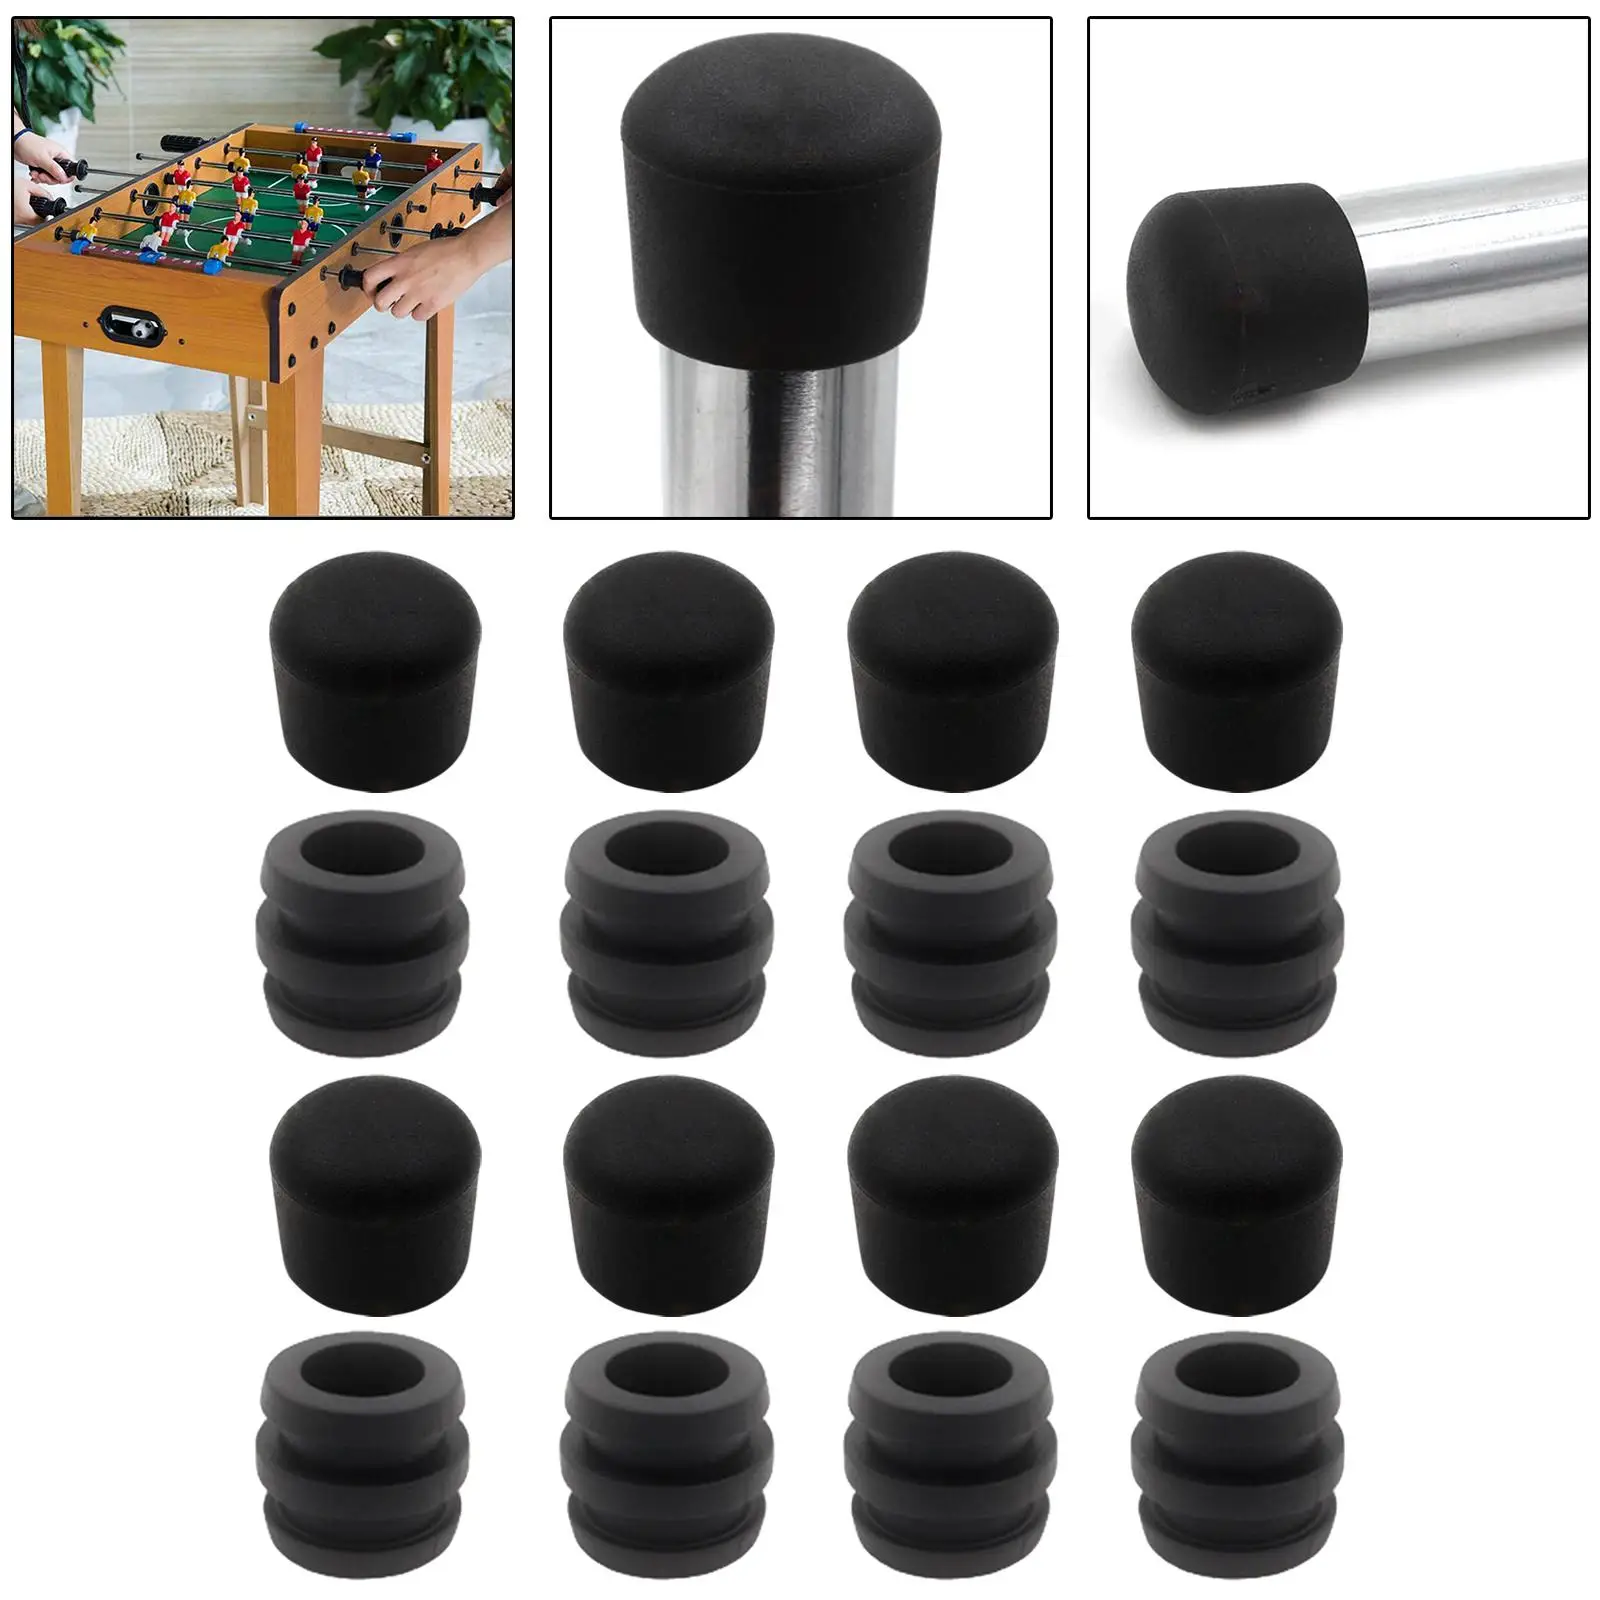 Rod Bumpers End Caps Table Soccer Durable Universal Plastic Parts Standard Foosball Tables Fussball Rod Bumper Buffer